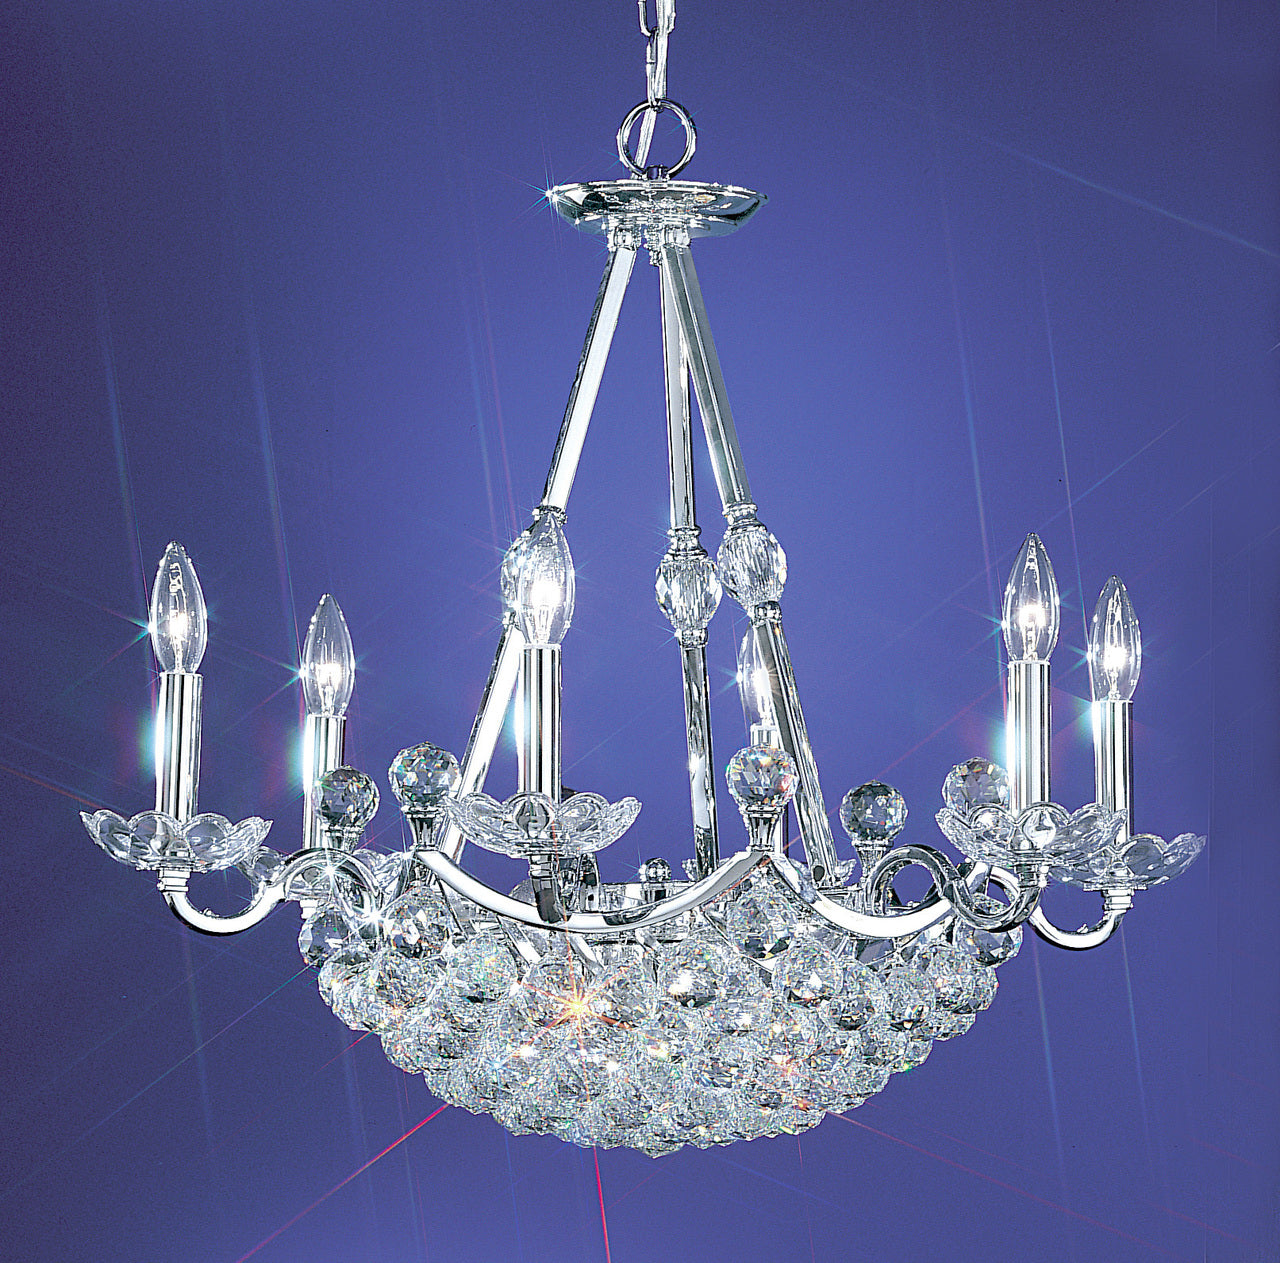 Classic Lighting 69776 CH CP Solitaire Crystal Chandelier in Chrome